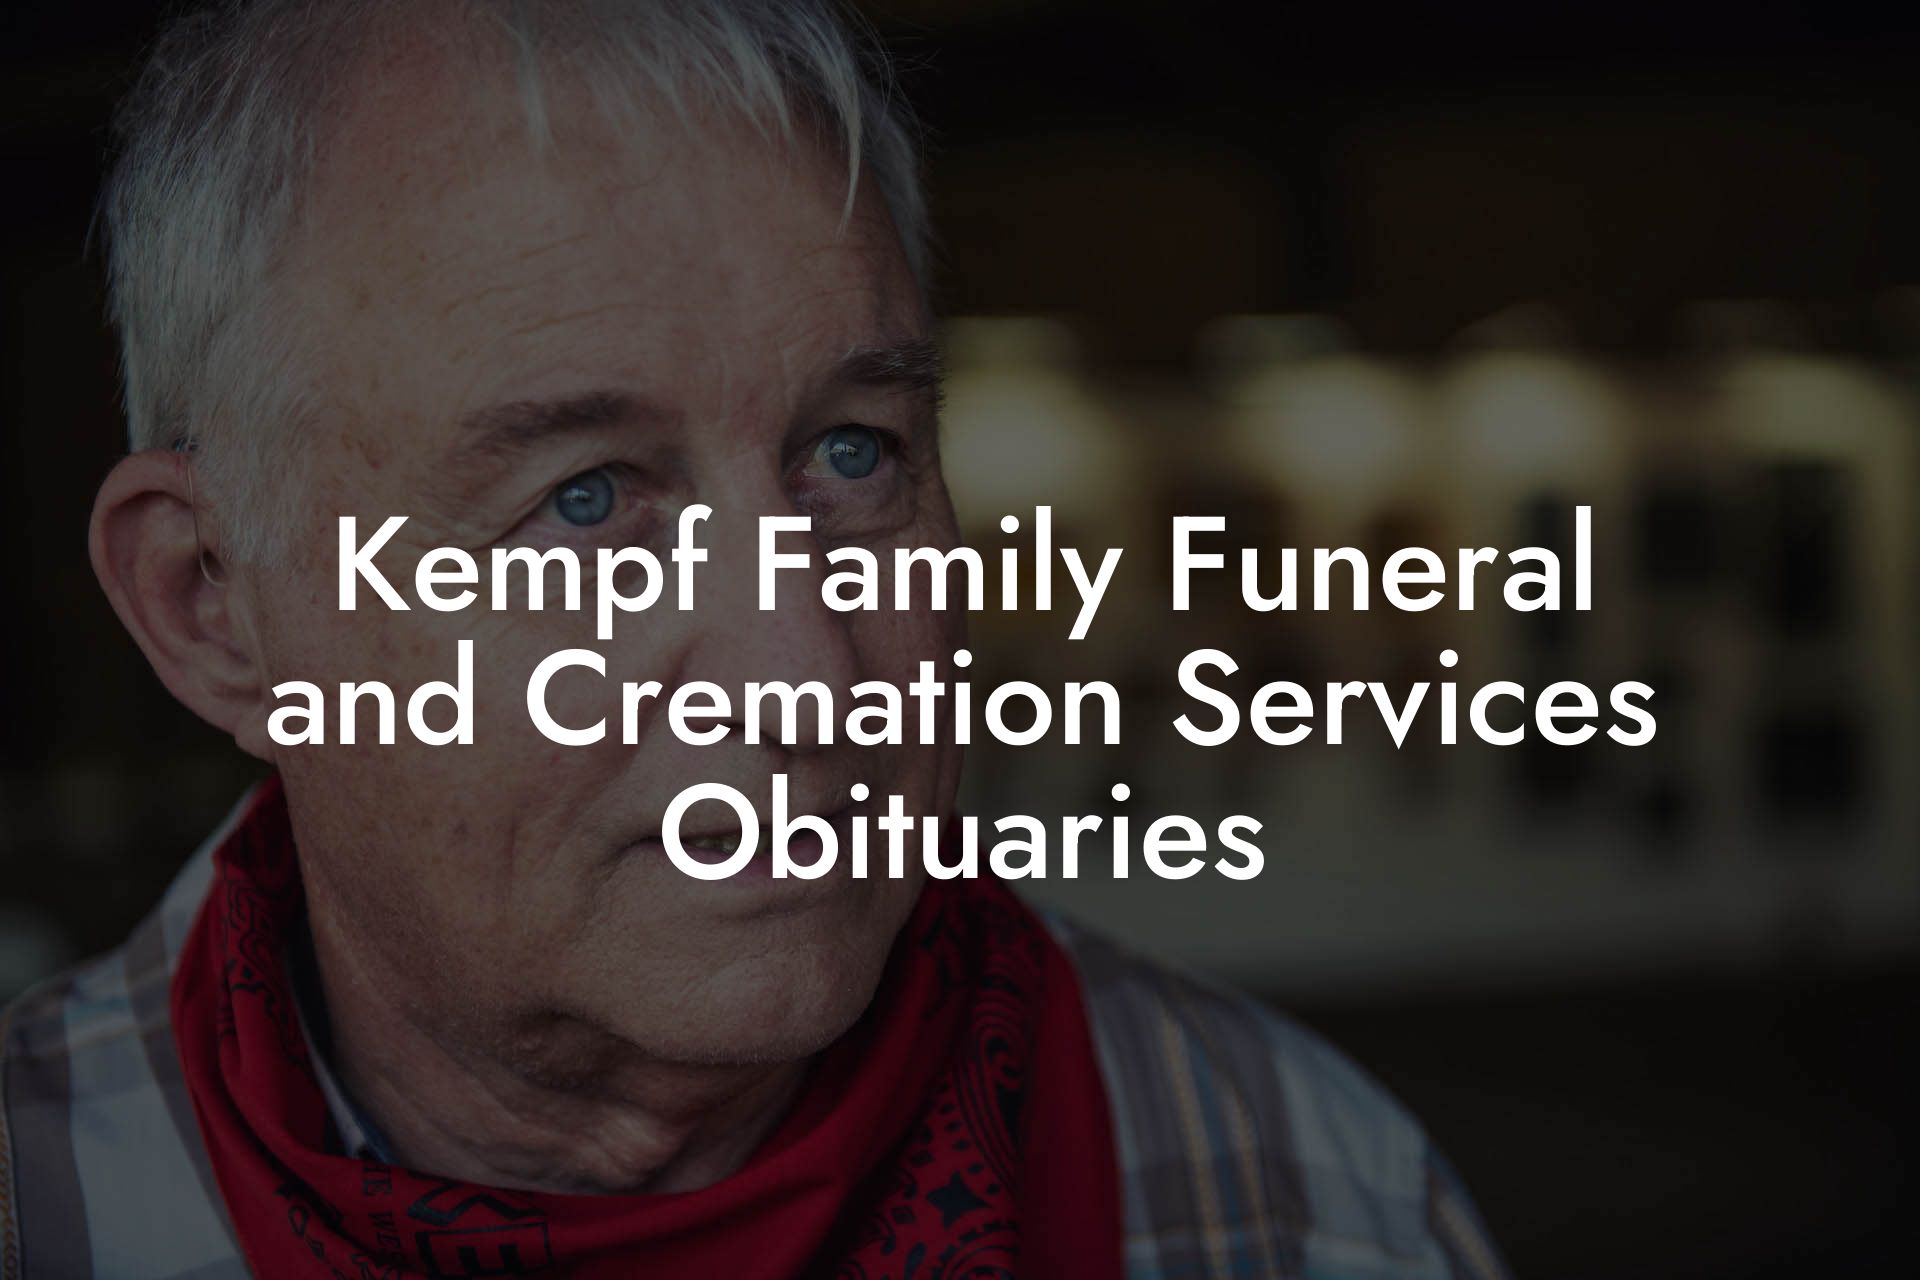 Kempf Family Funeral and Cremation Services Obituaries